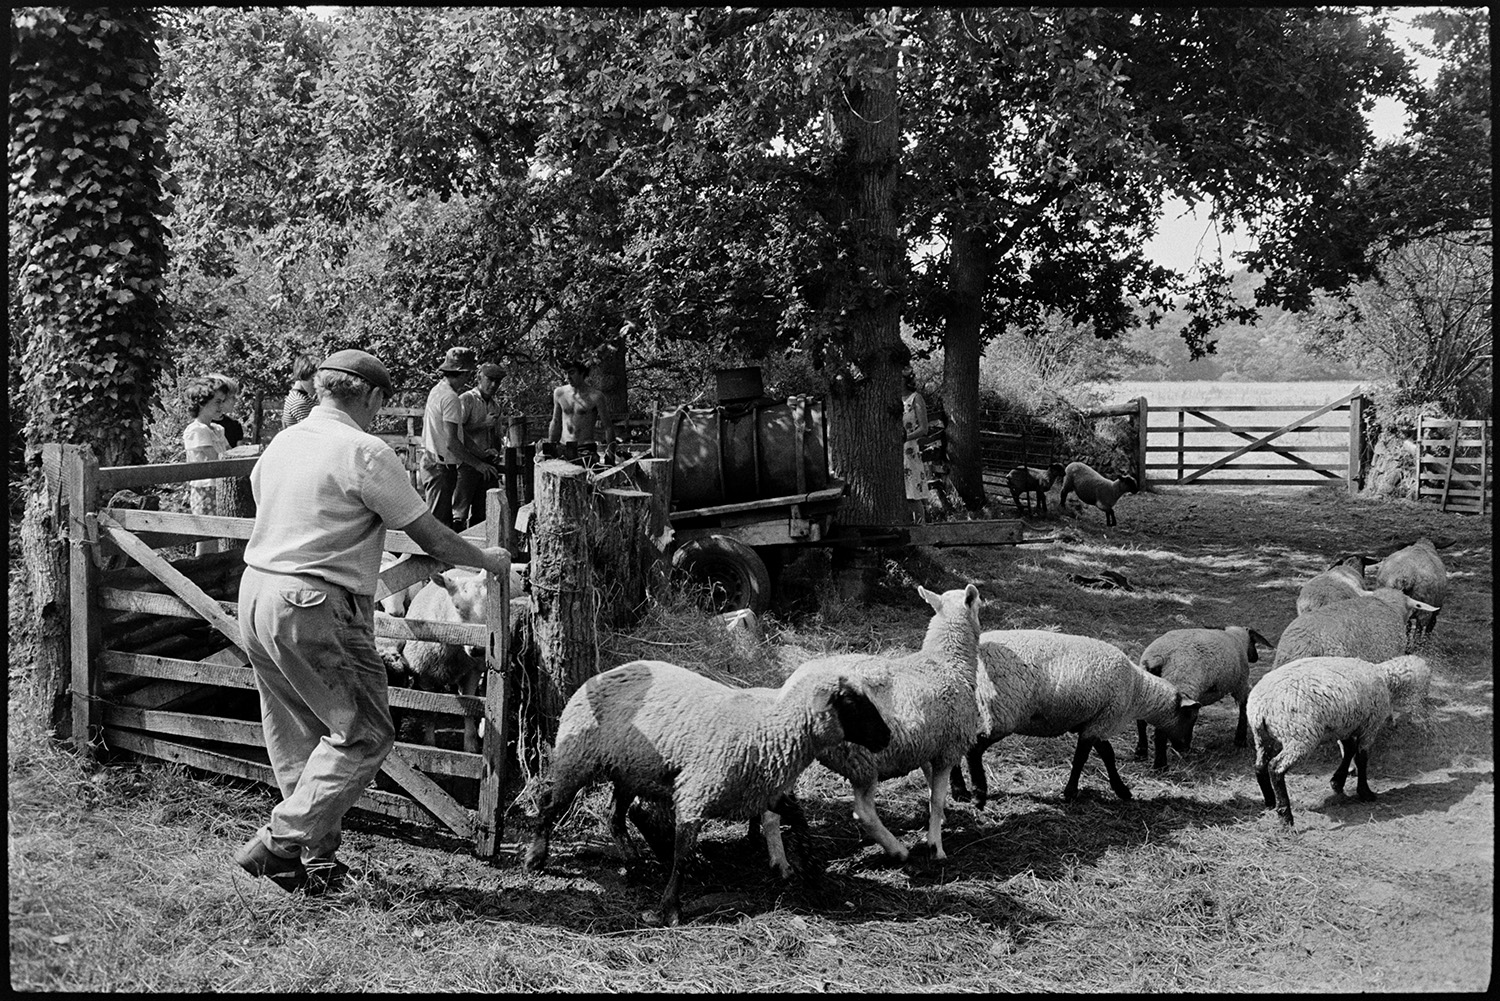 Sheep being dipped. 
[Graham Ward, David Ward, John Ward and other people dipping sheep at Parsonage, Iddesleigh. John Ward is opening a pen to let sheep out after being dipped.]